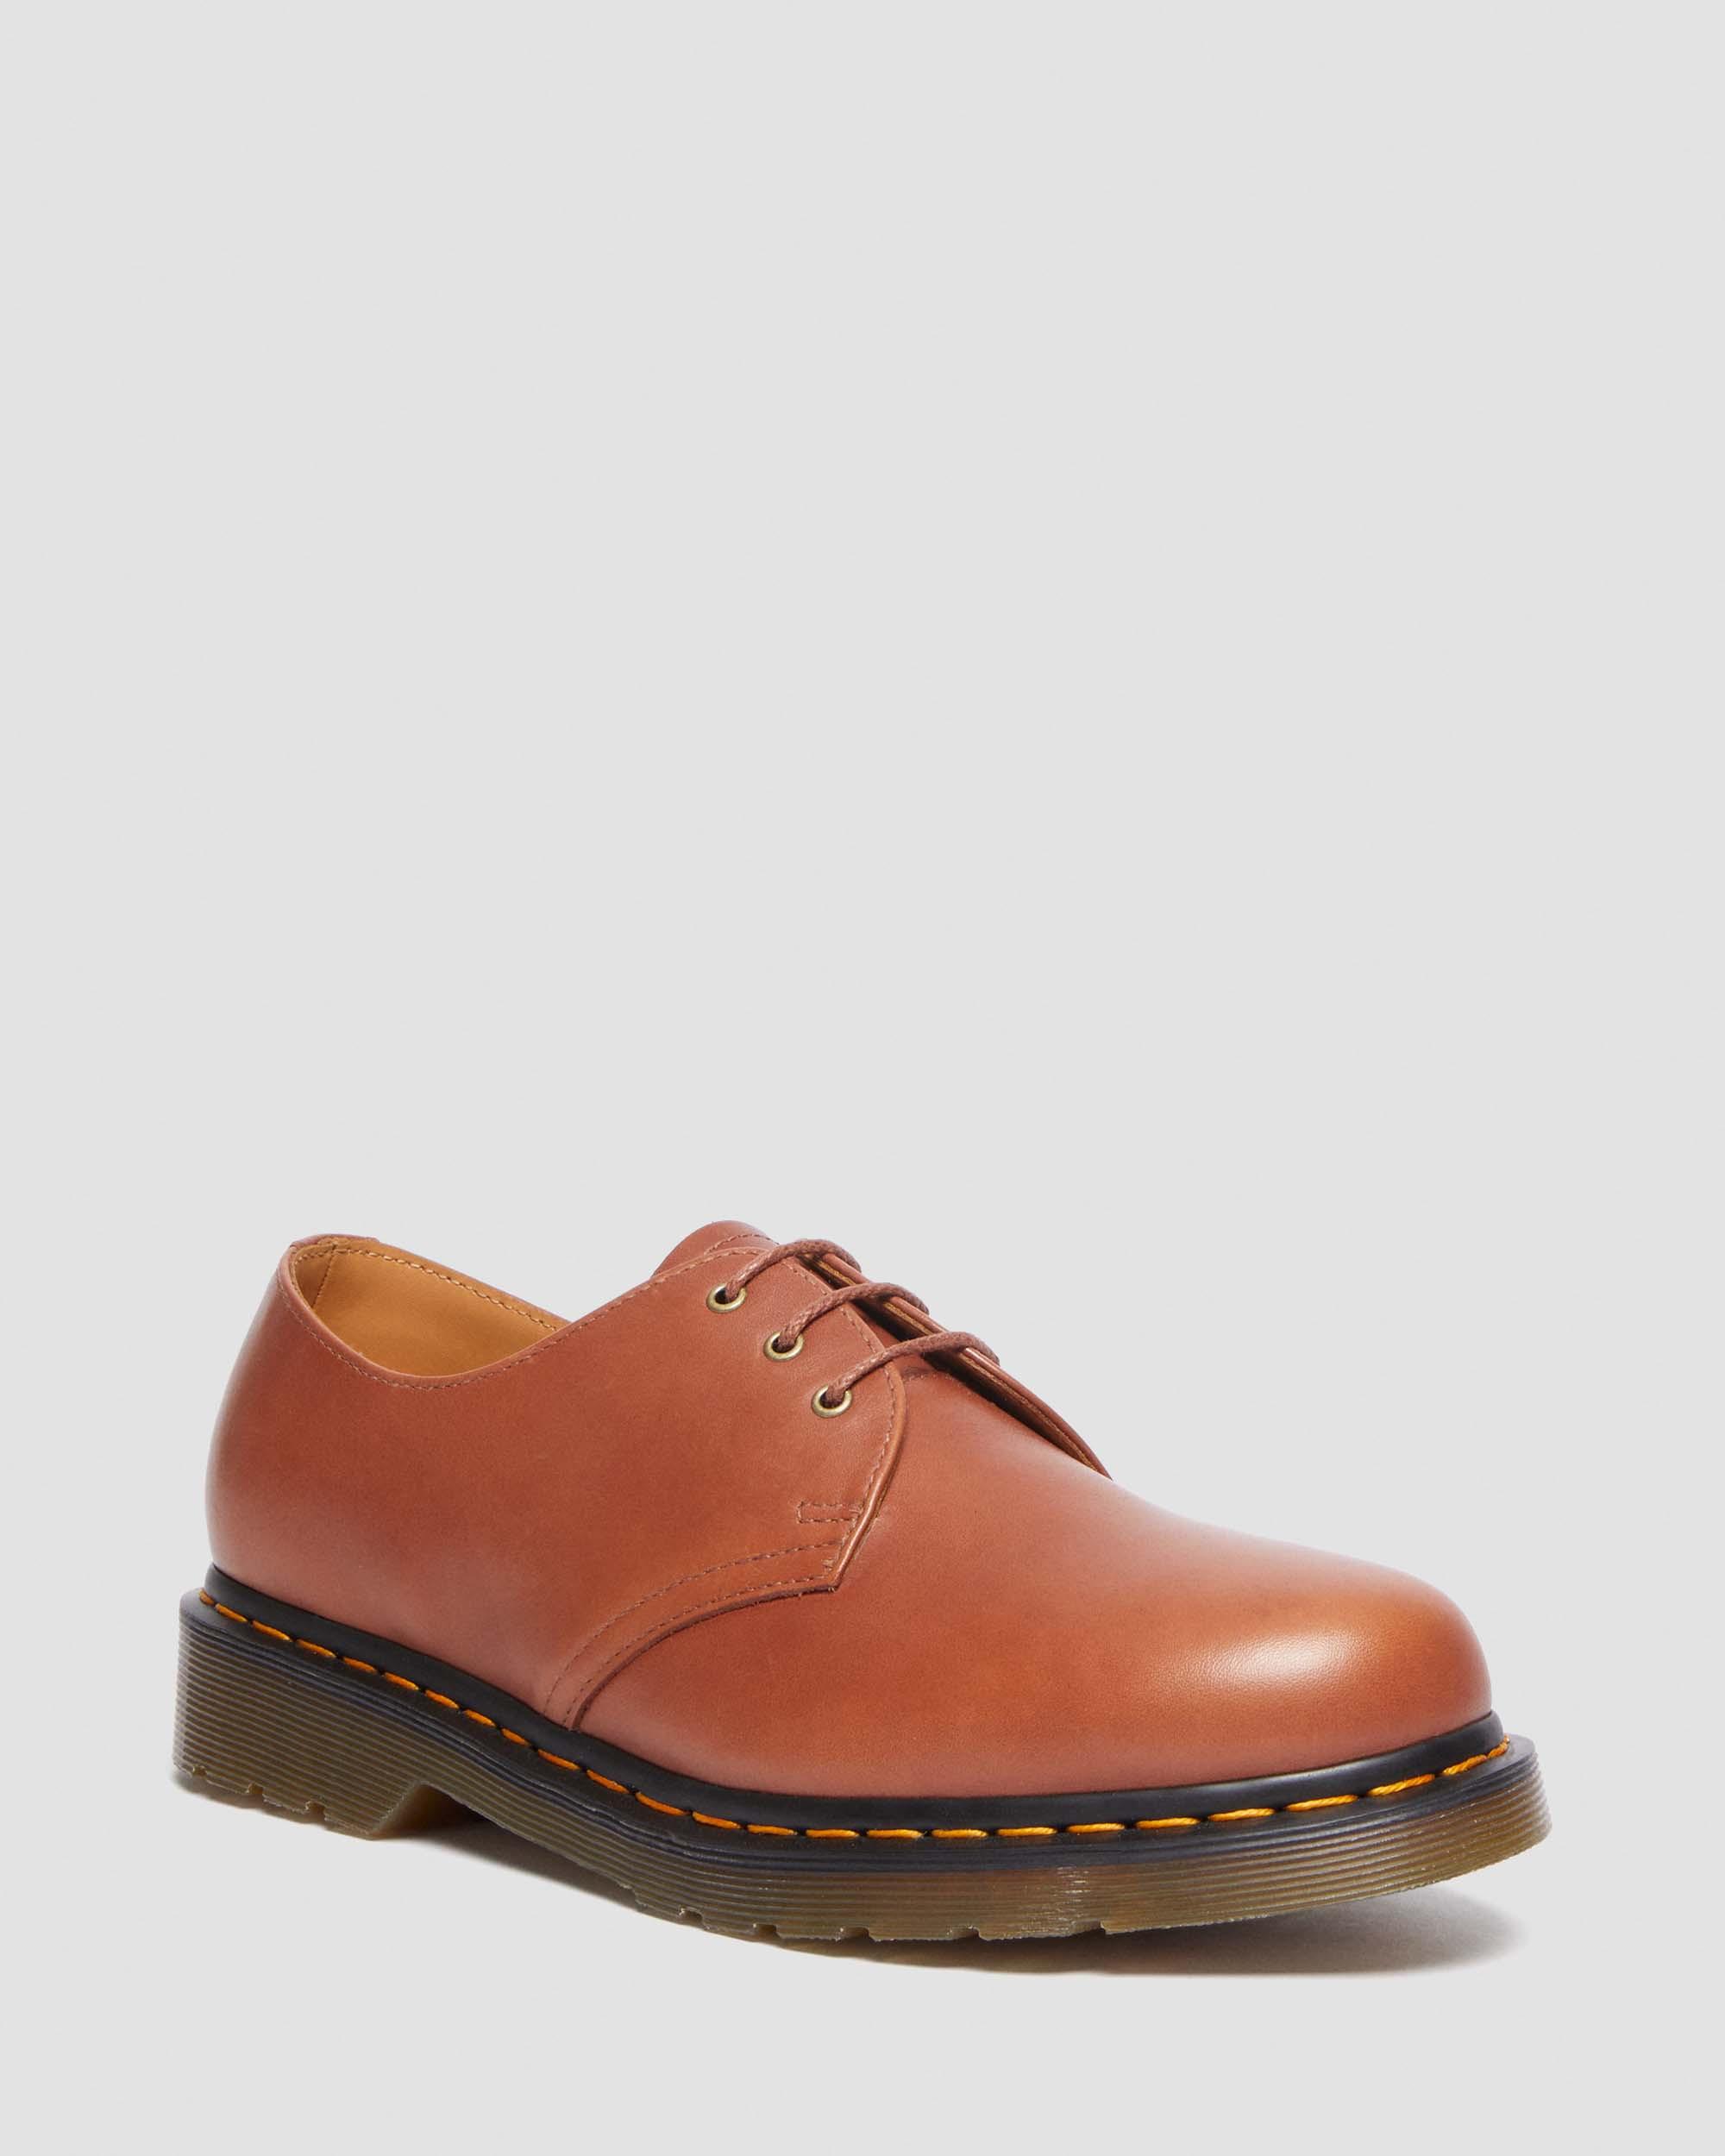 1461 Carrara Leather Oxford Shoes in Saddle Tan | Dr. Martens